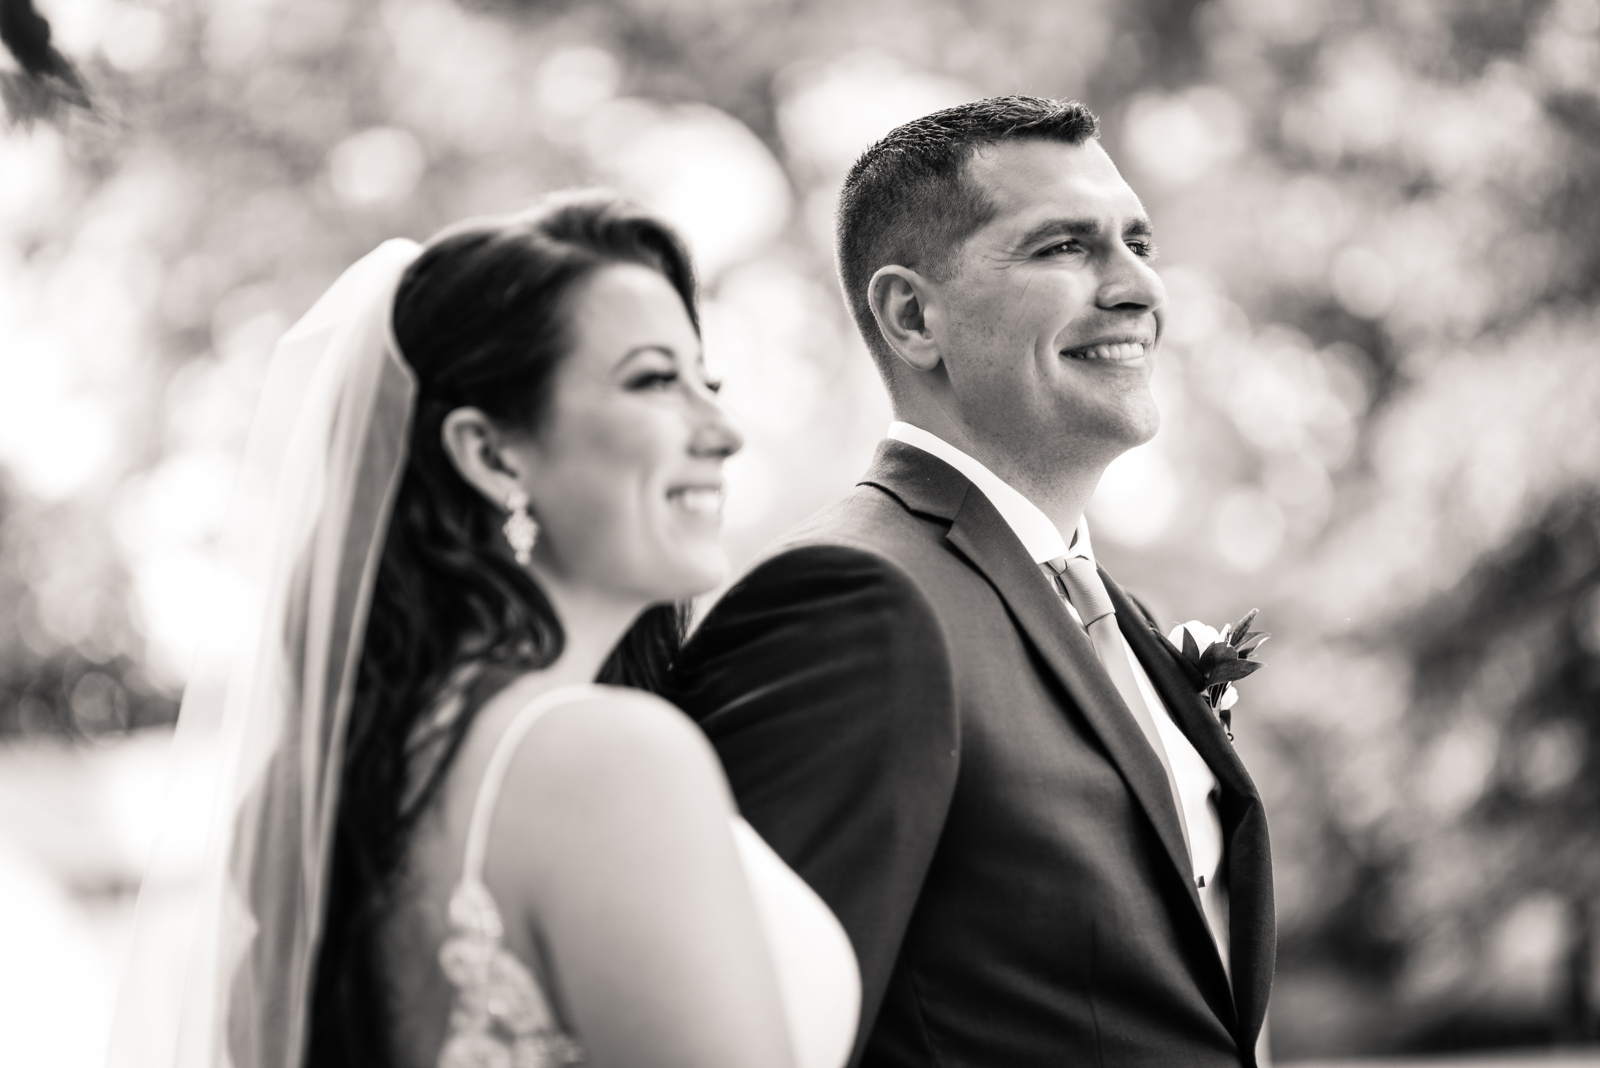 Jared & Danielle {Wedding by Haley} – Tessa Marie Images